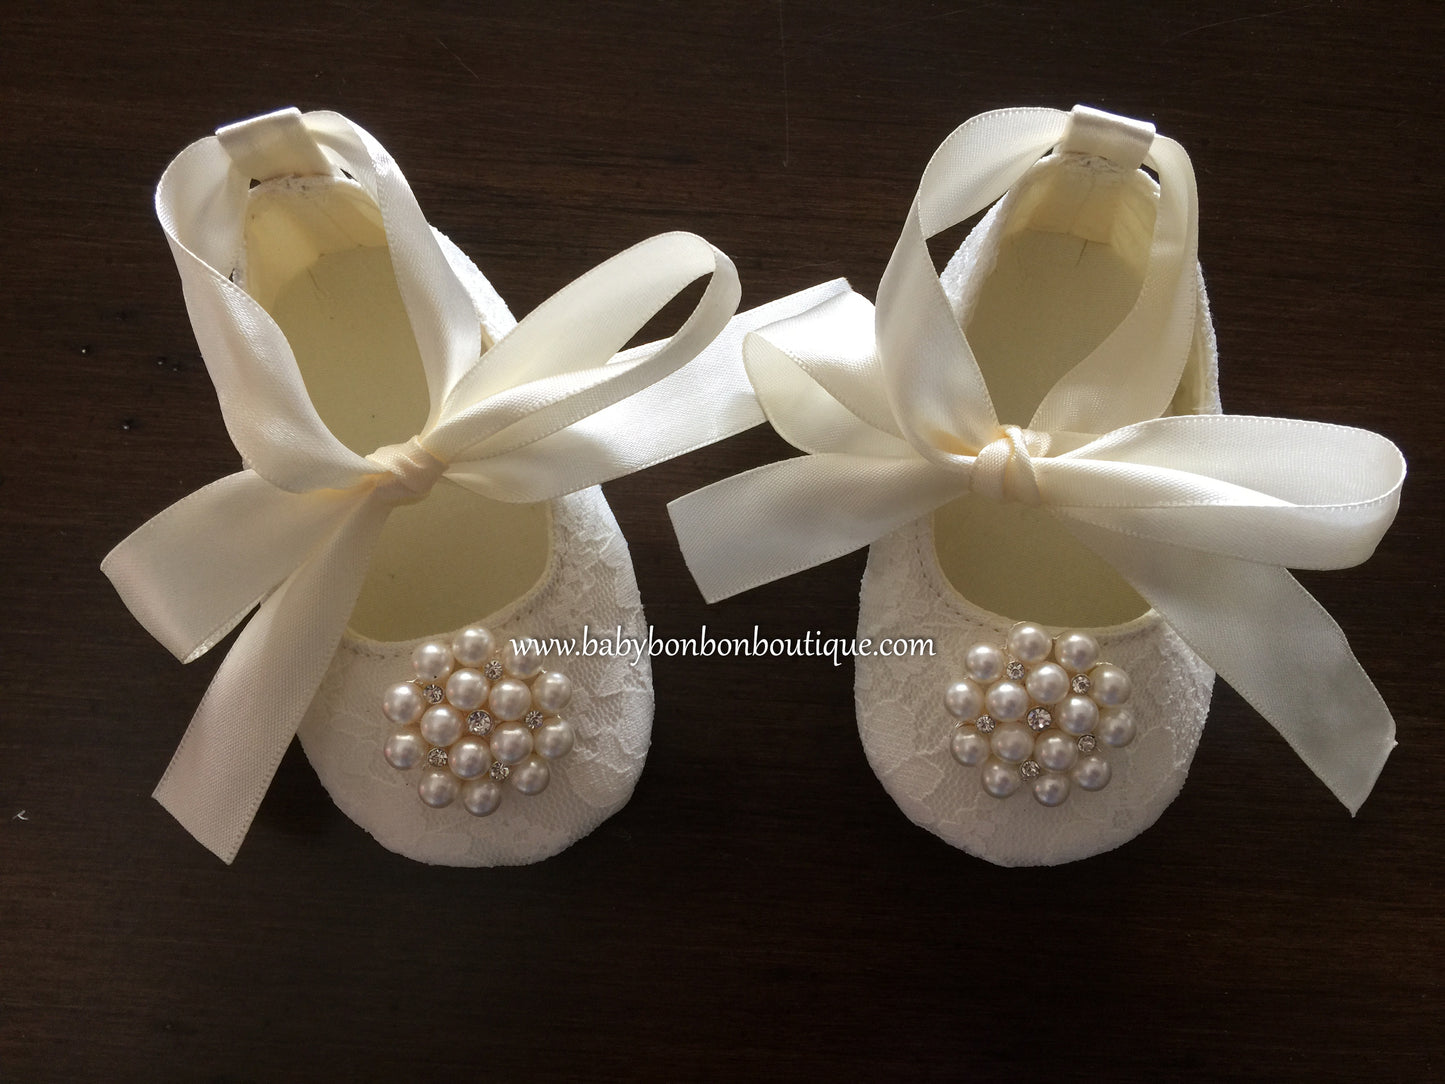 French White Baby Baptism Shoes with Pearl Rhinestones, Baby Ivory Baptism Shoes